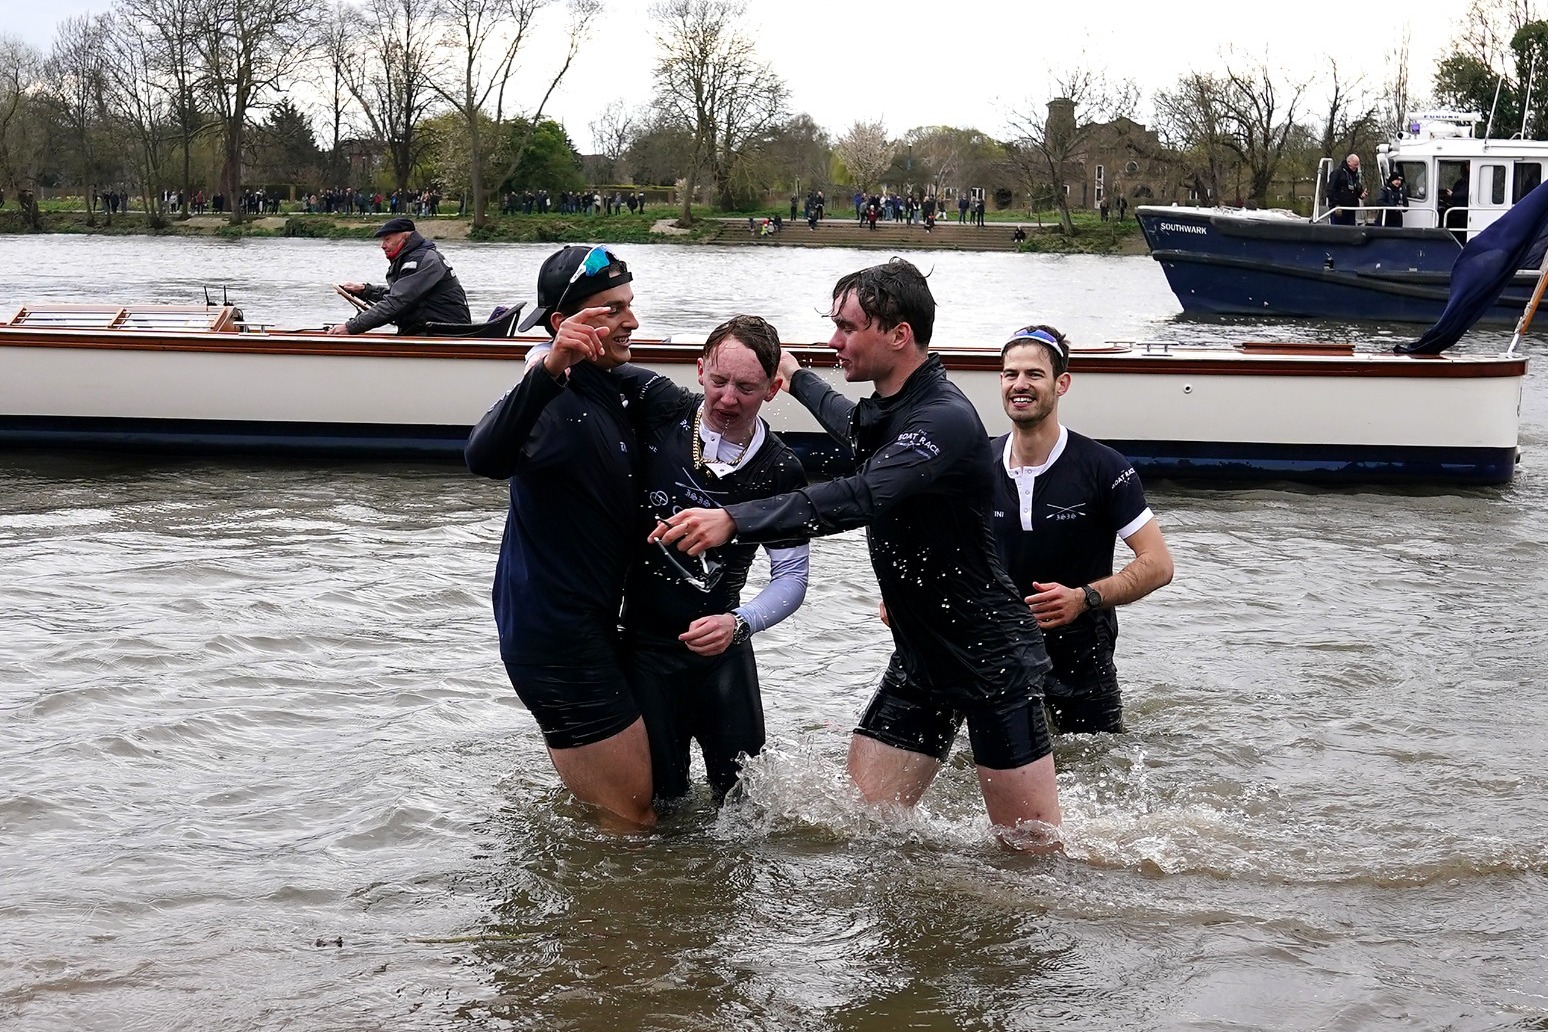 Oxford overcome Cambridge to win mens Boat Race for first time since 2017